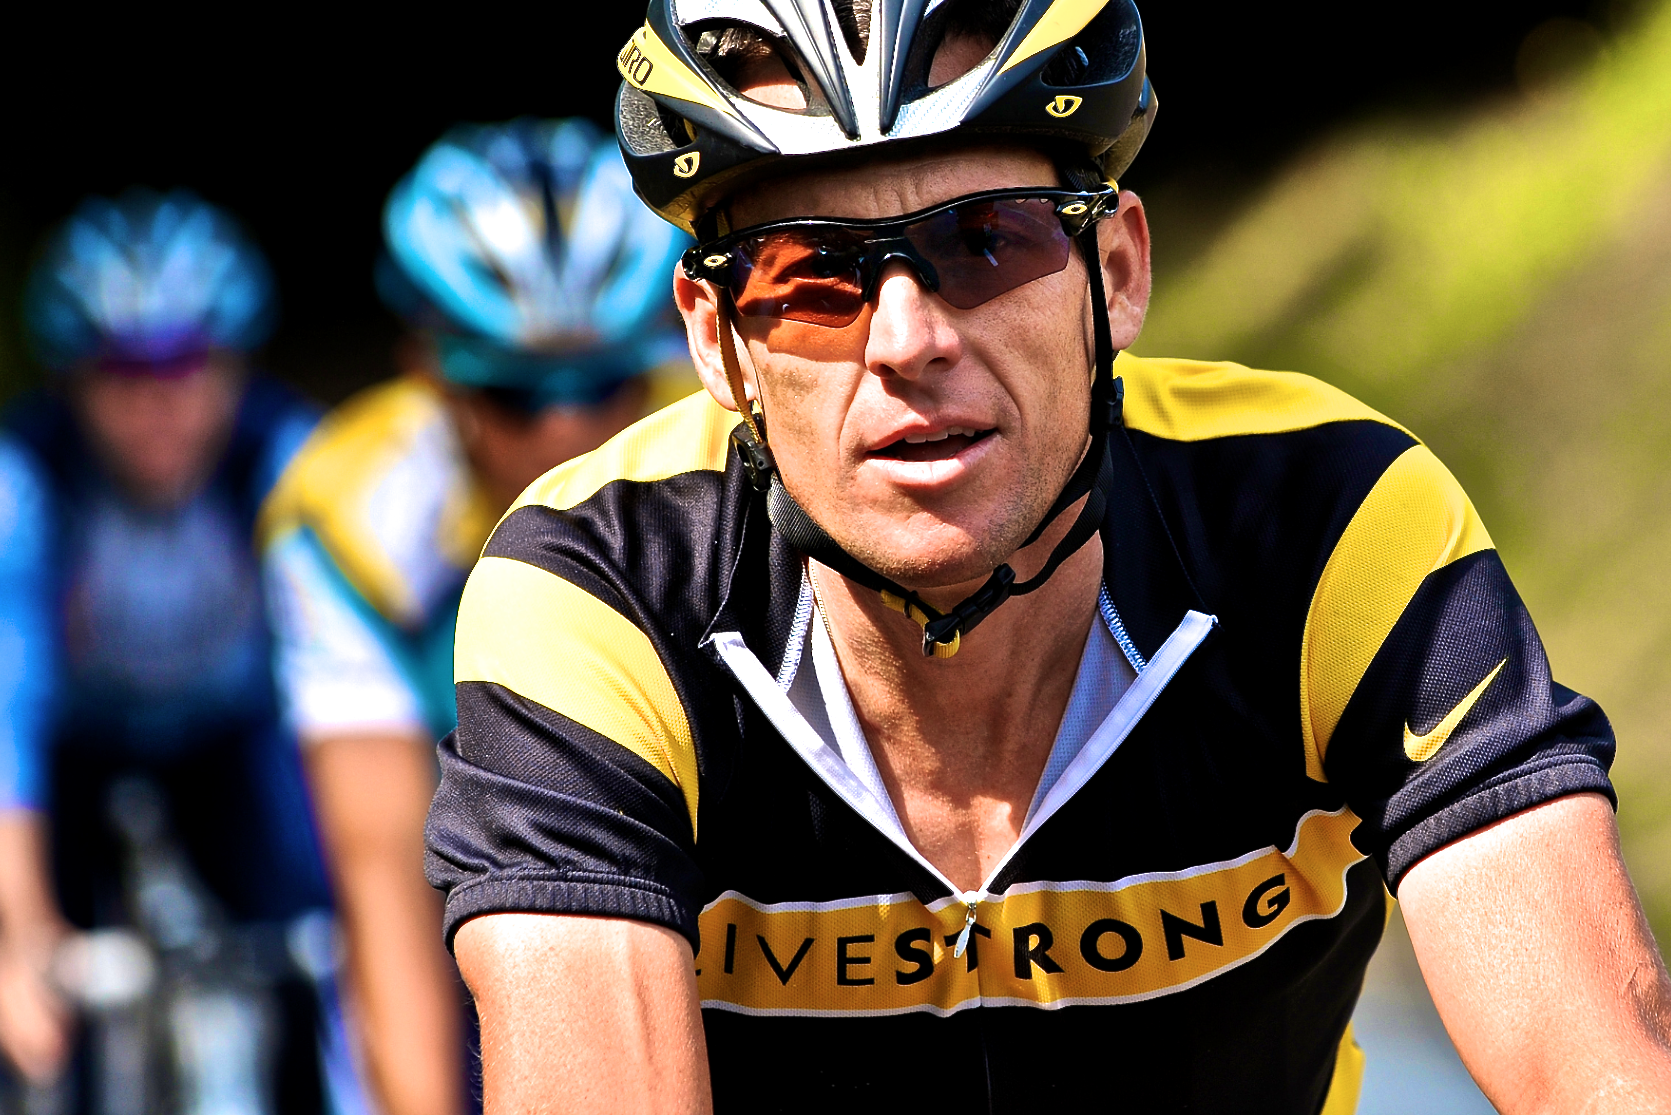 Armstrong Loses Eight Sponsors in a Day